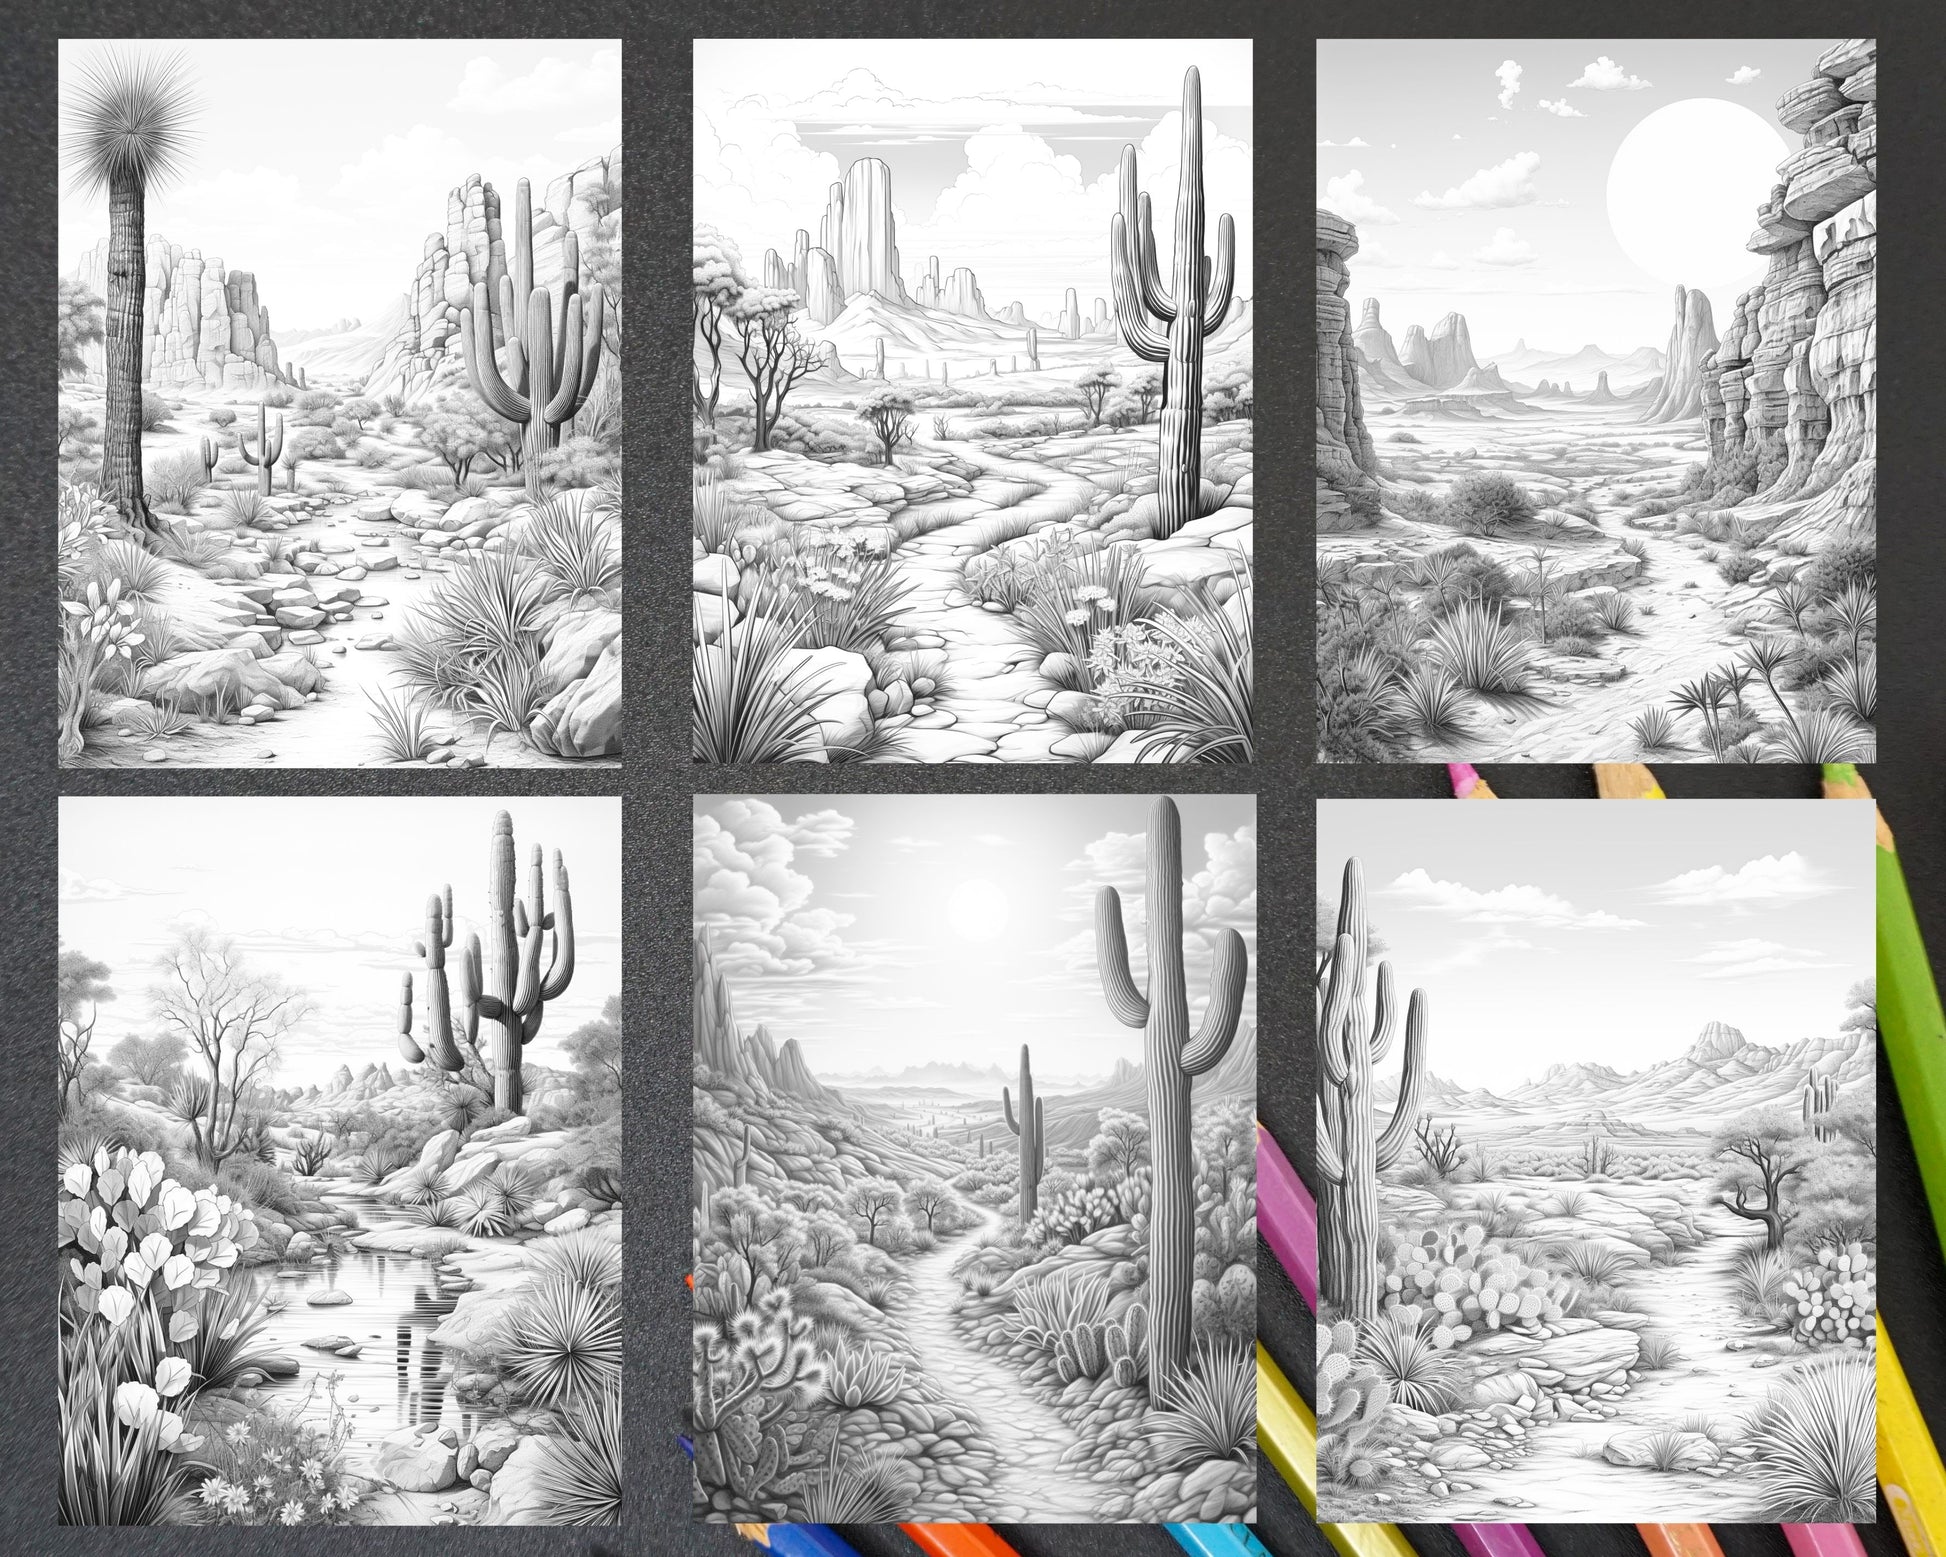 Grayscale Desert Landscapes Printable Adults, Adult Coloring Pages Desert Landscapes, Printable Desert Landscape Coloring Pages, Creative Desert Theme Coloring Prints, Nature Coloring Pages Desert Scenery